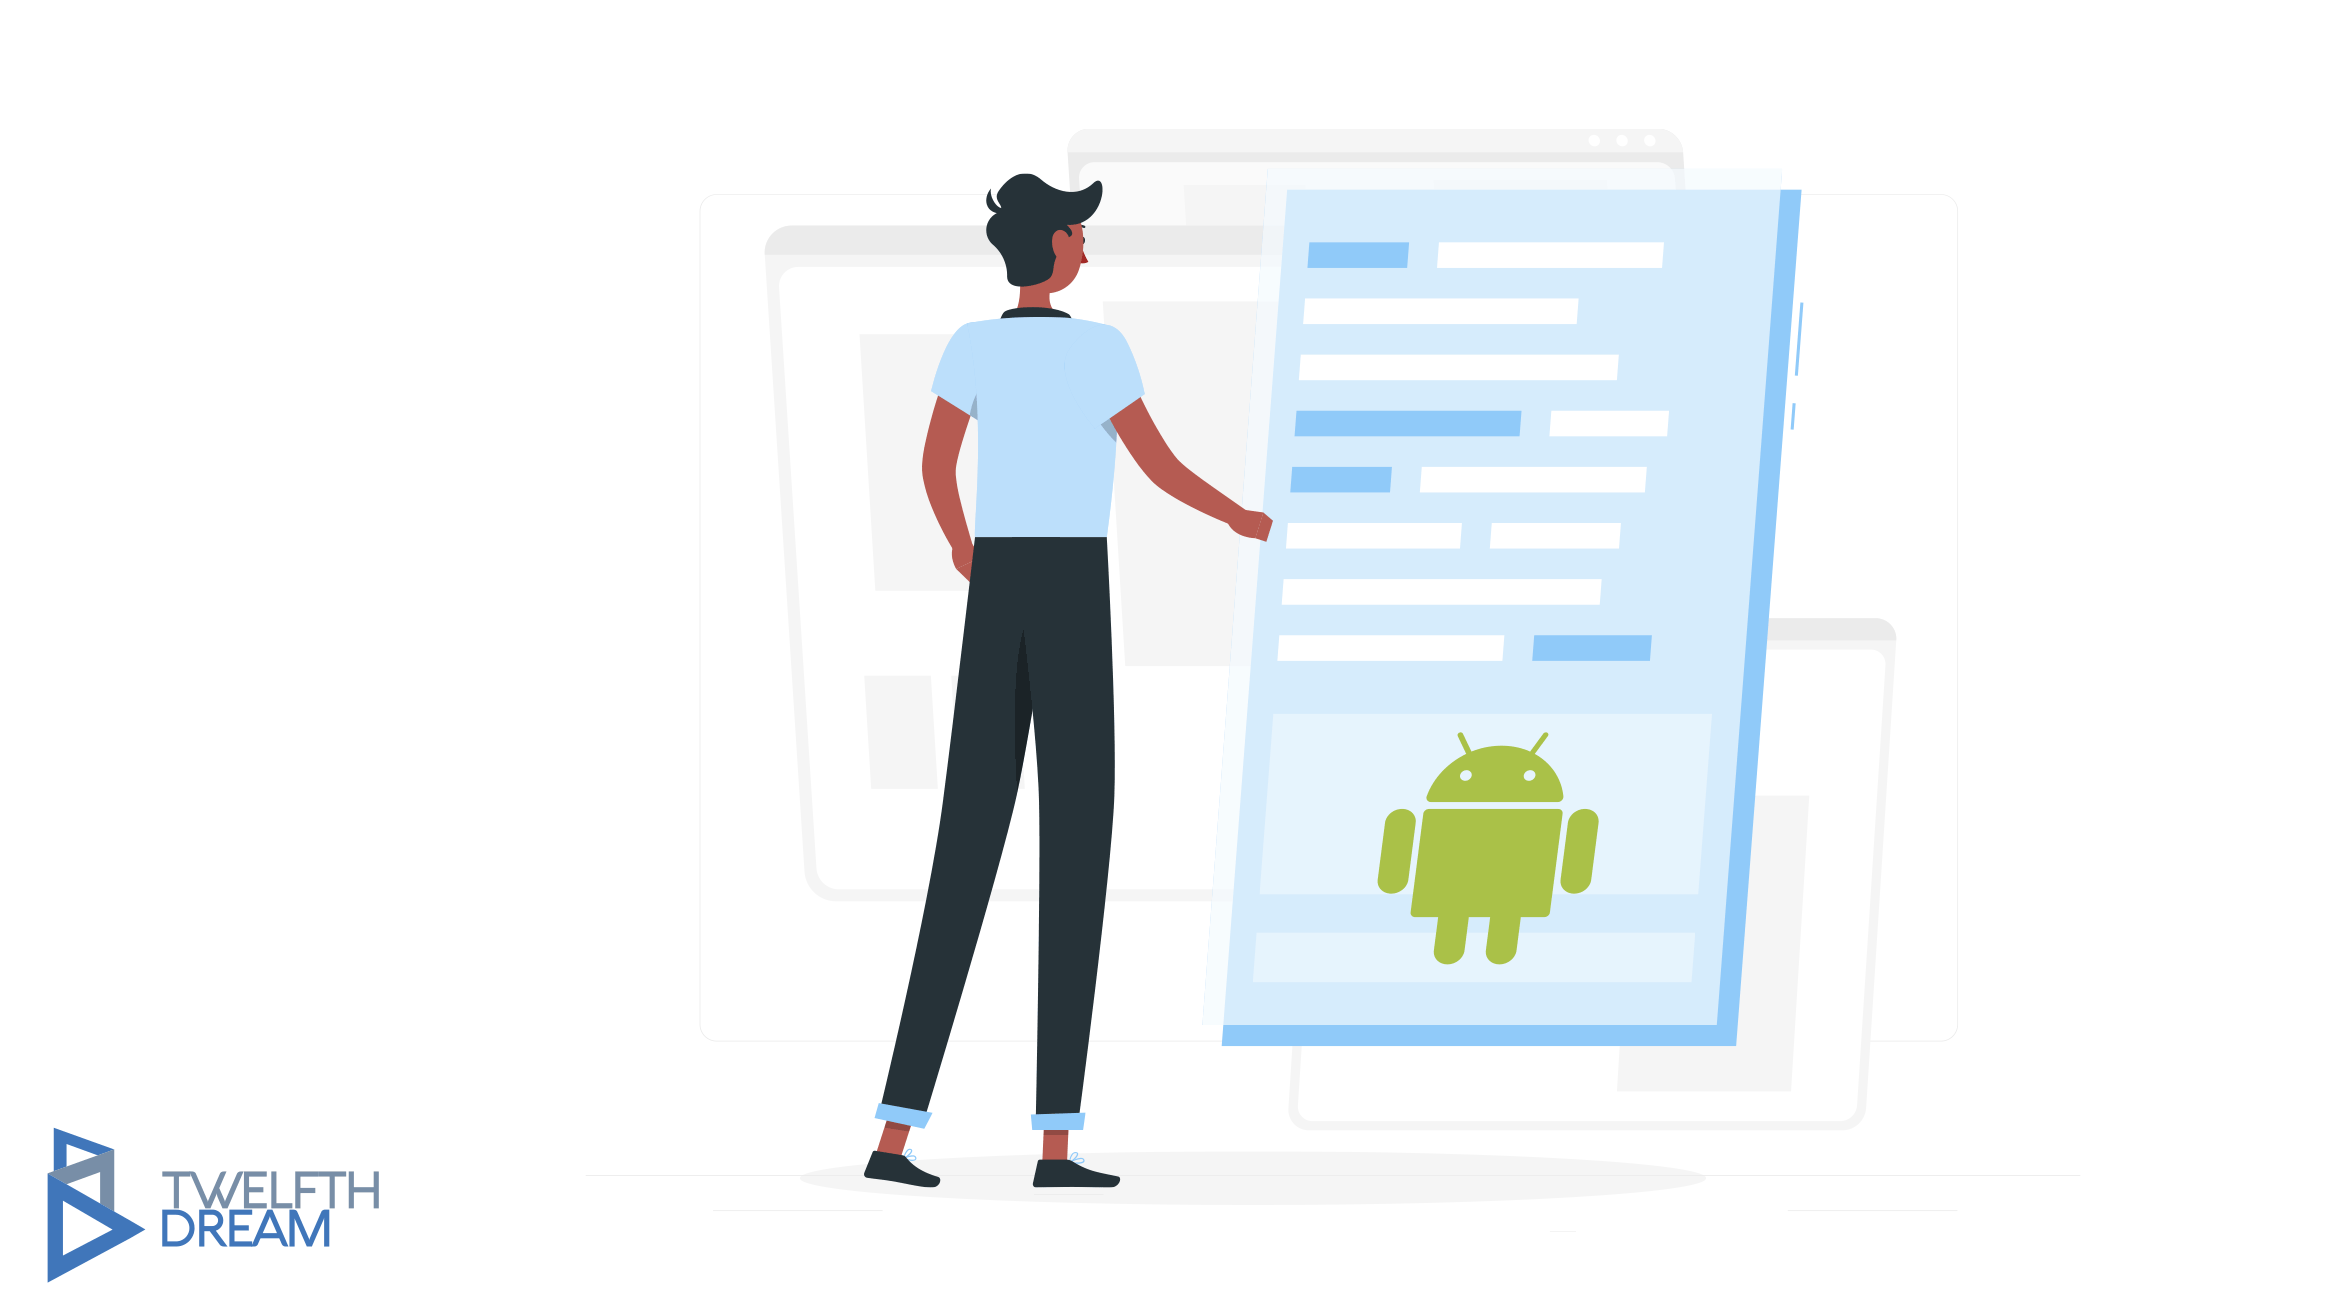 Best Android libraries